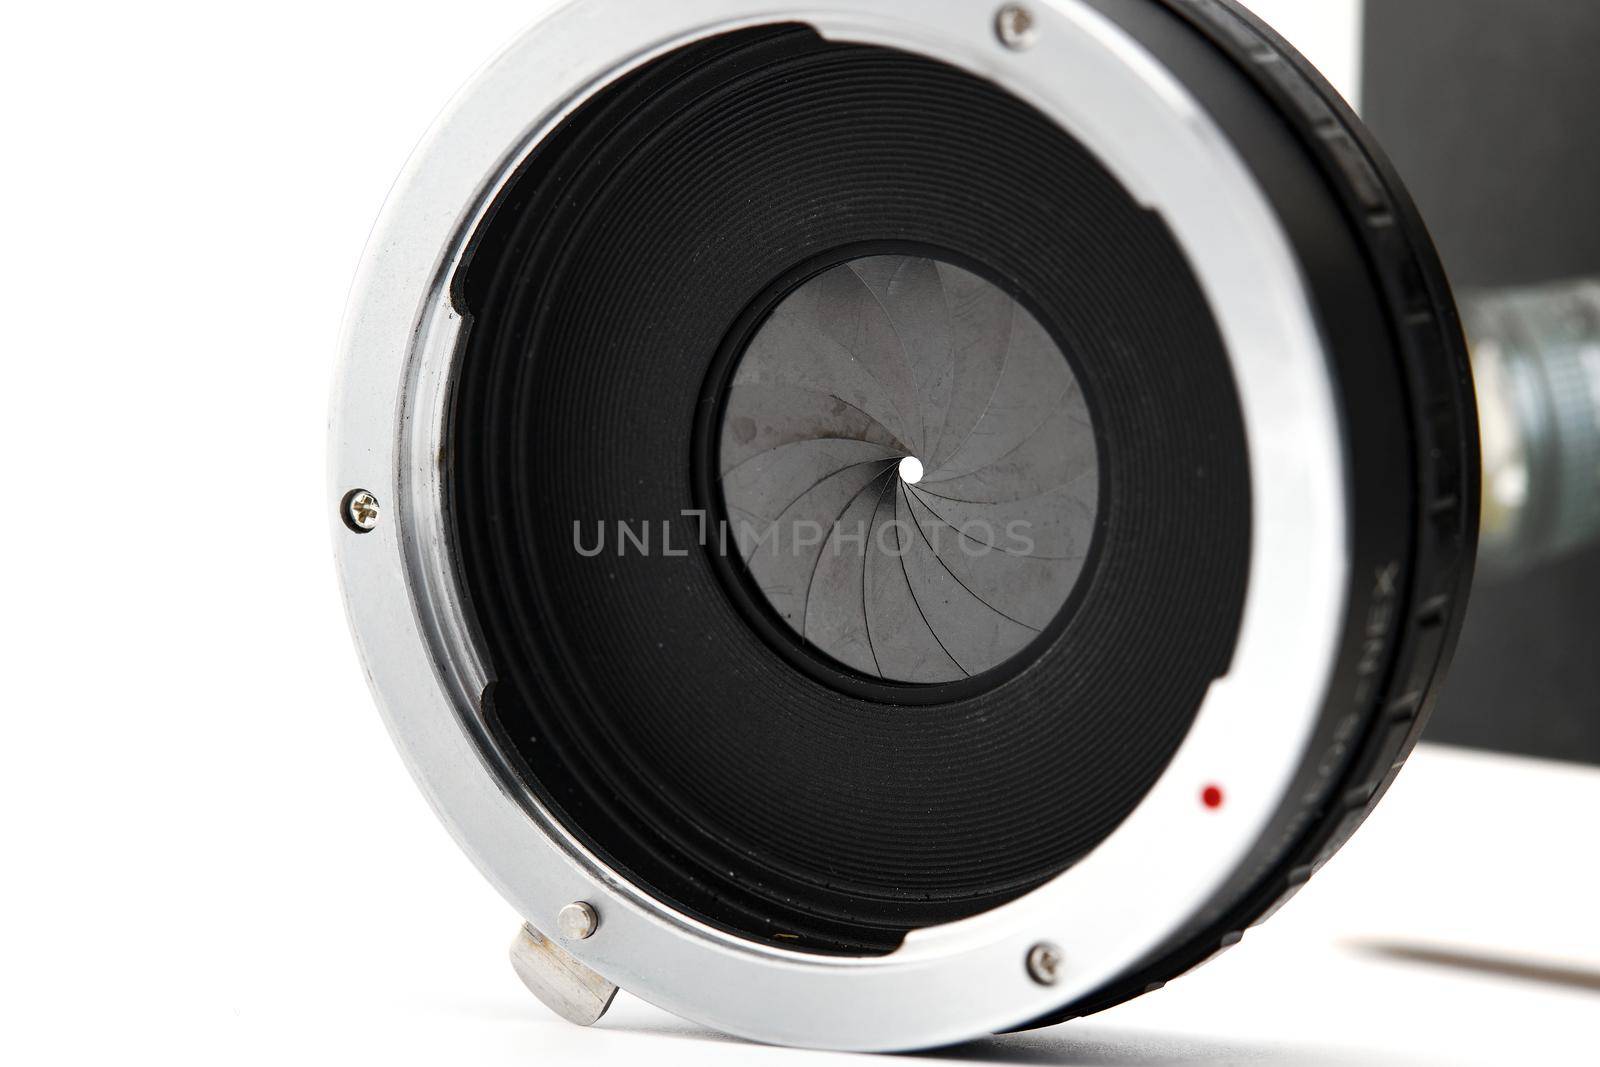 Additional aperture for a photo lens. Photography of Circular Aperture Diaphragm.